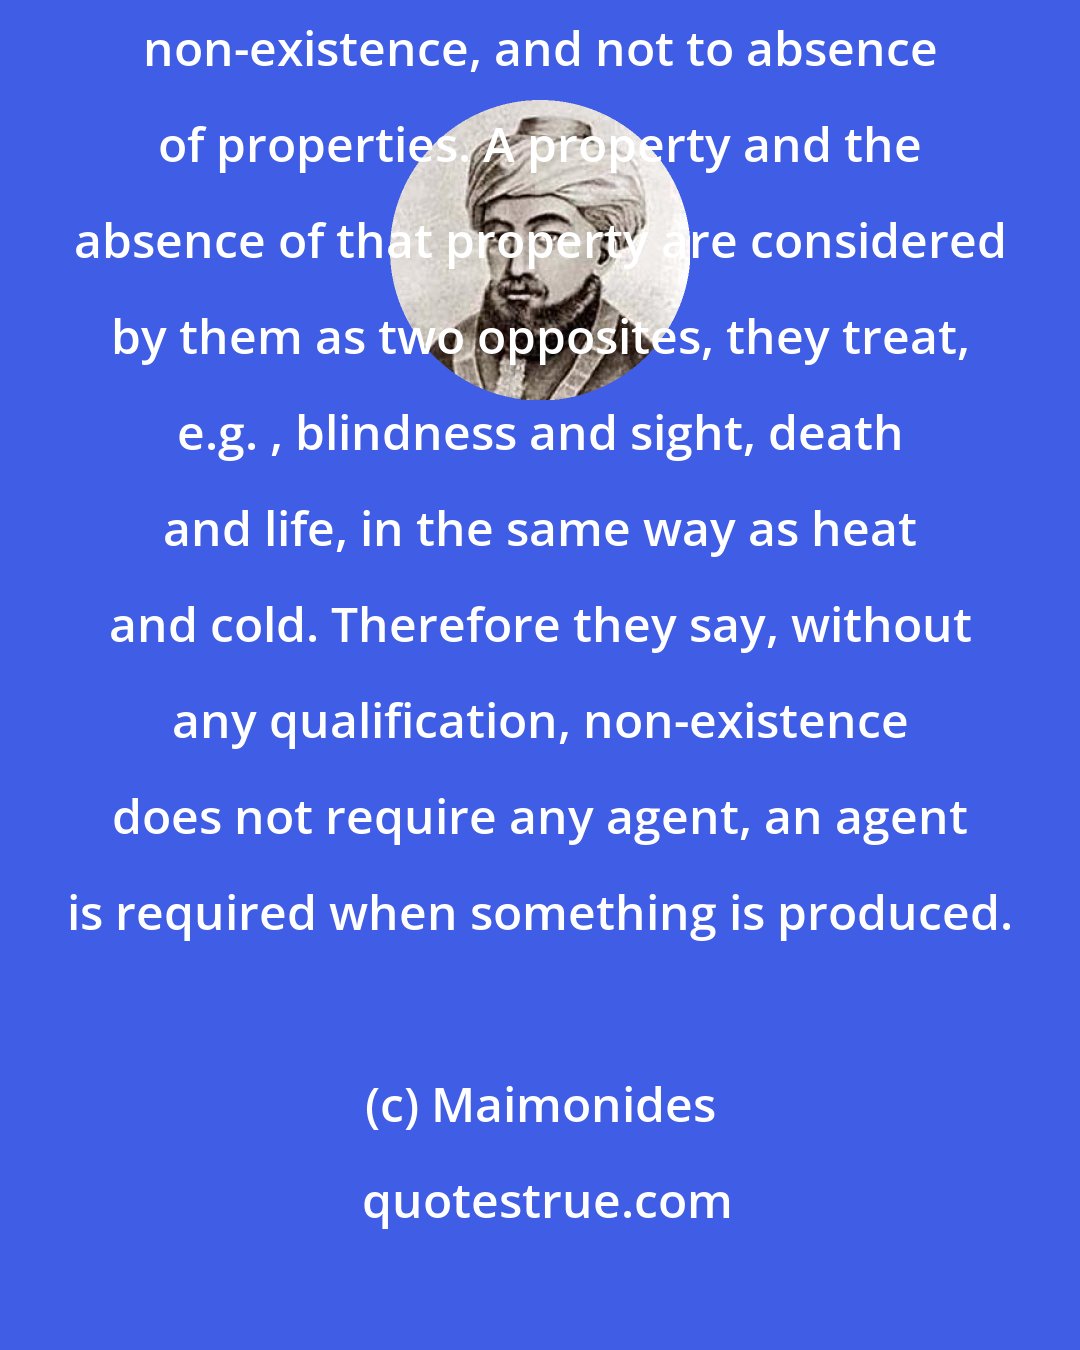 Maimonides: The Mutakallemim... apply the term non-existence only to absolute non-existence, and not to absence of properties. A property and the absence of that property are considered by them as two opposites, they treat, e.g. , blindness and sight, death and life, in the same way as heat and cold. Therefore they say, without any qualification, non-existence does not require any agent, an agent is required when something is produced.